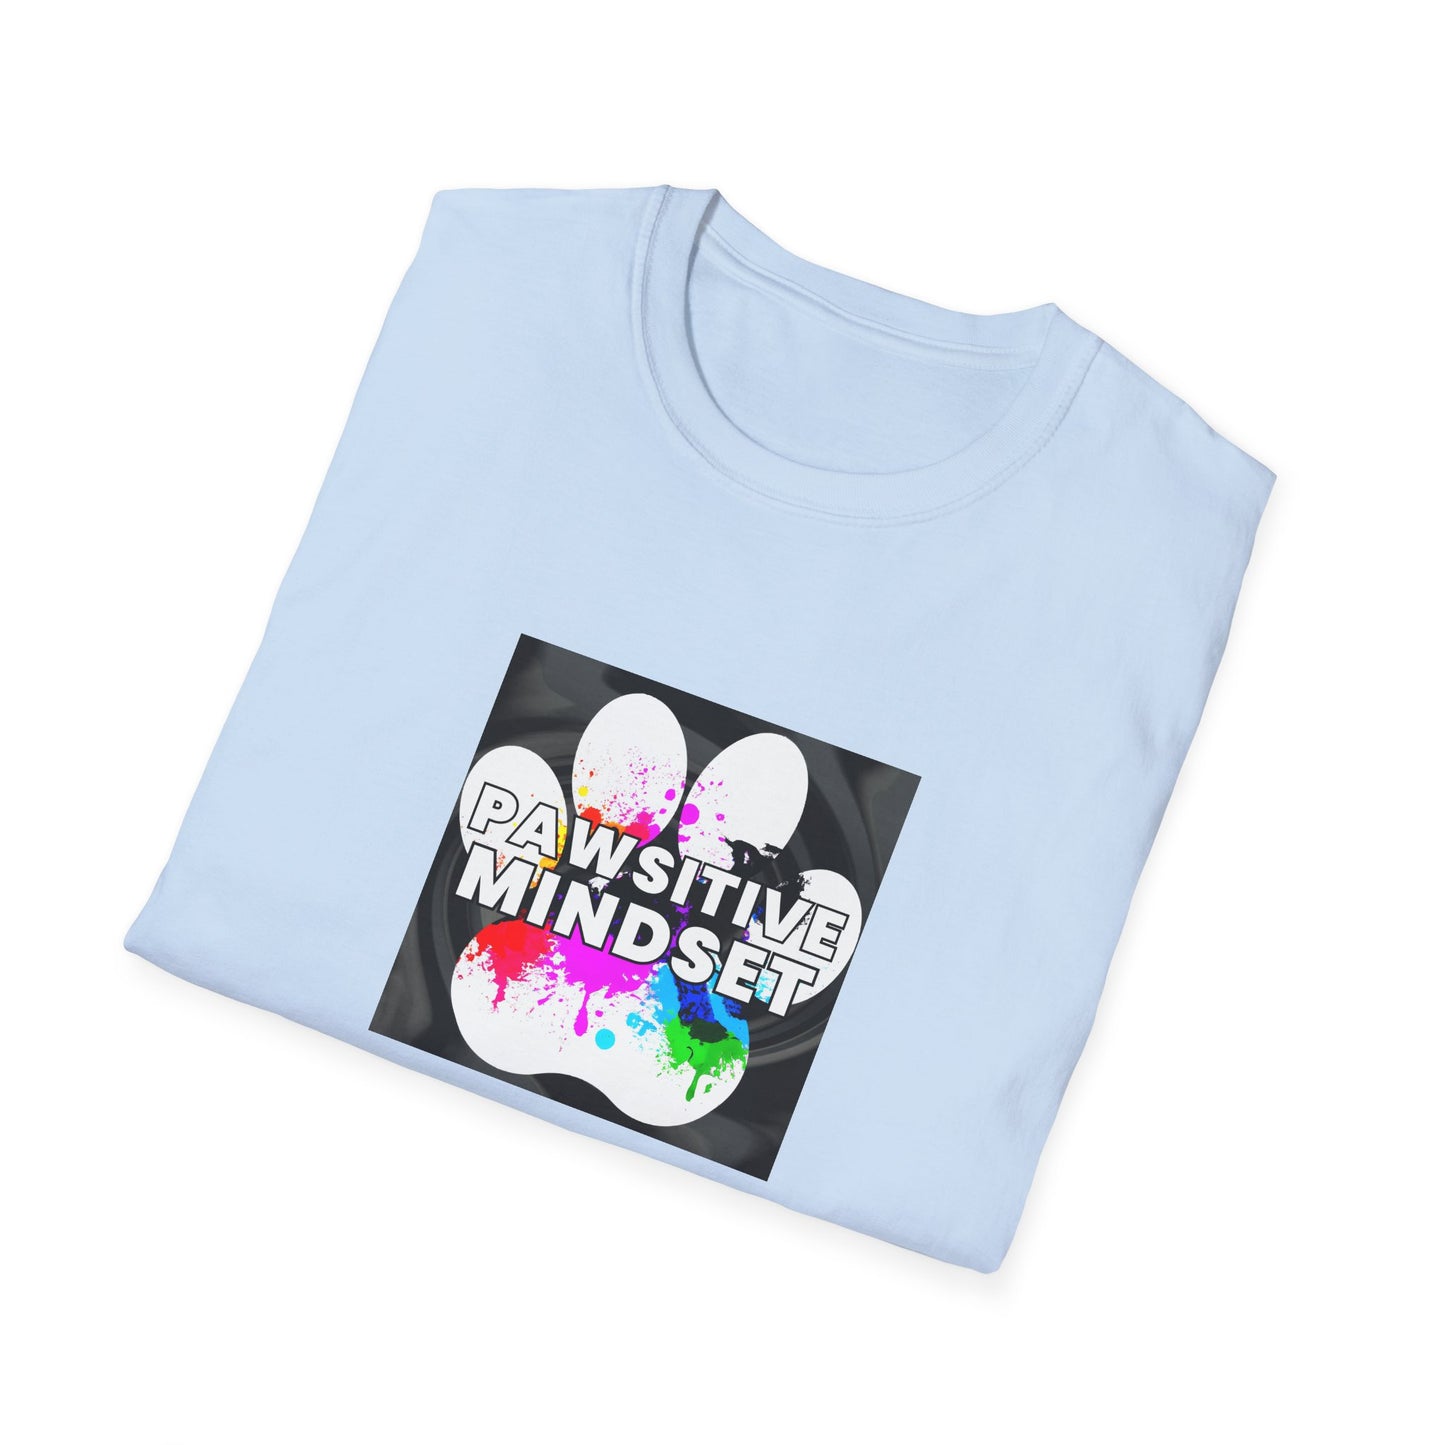 Streetwise Styles by Sage. - "Pawsitive Mindset" Unisex Tee